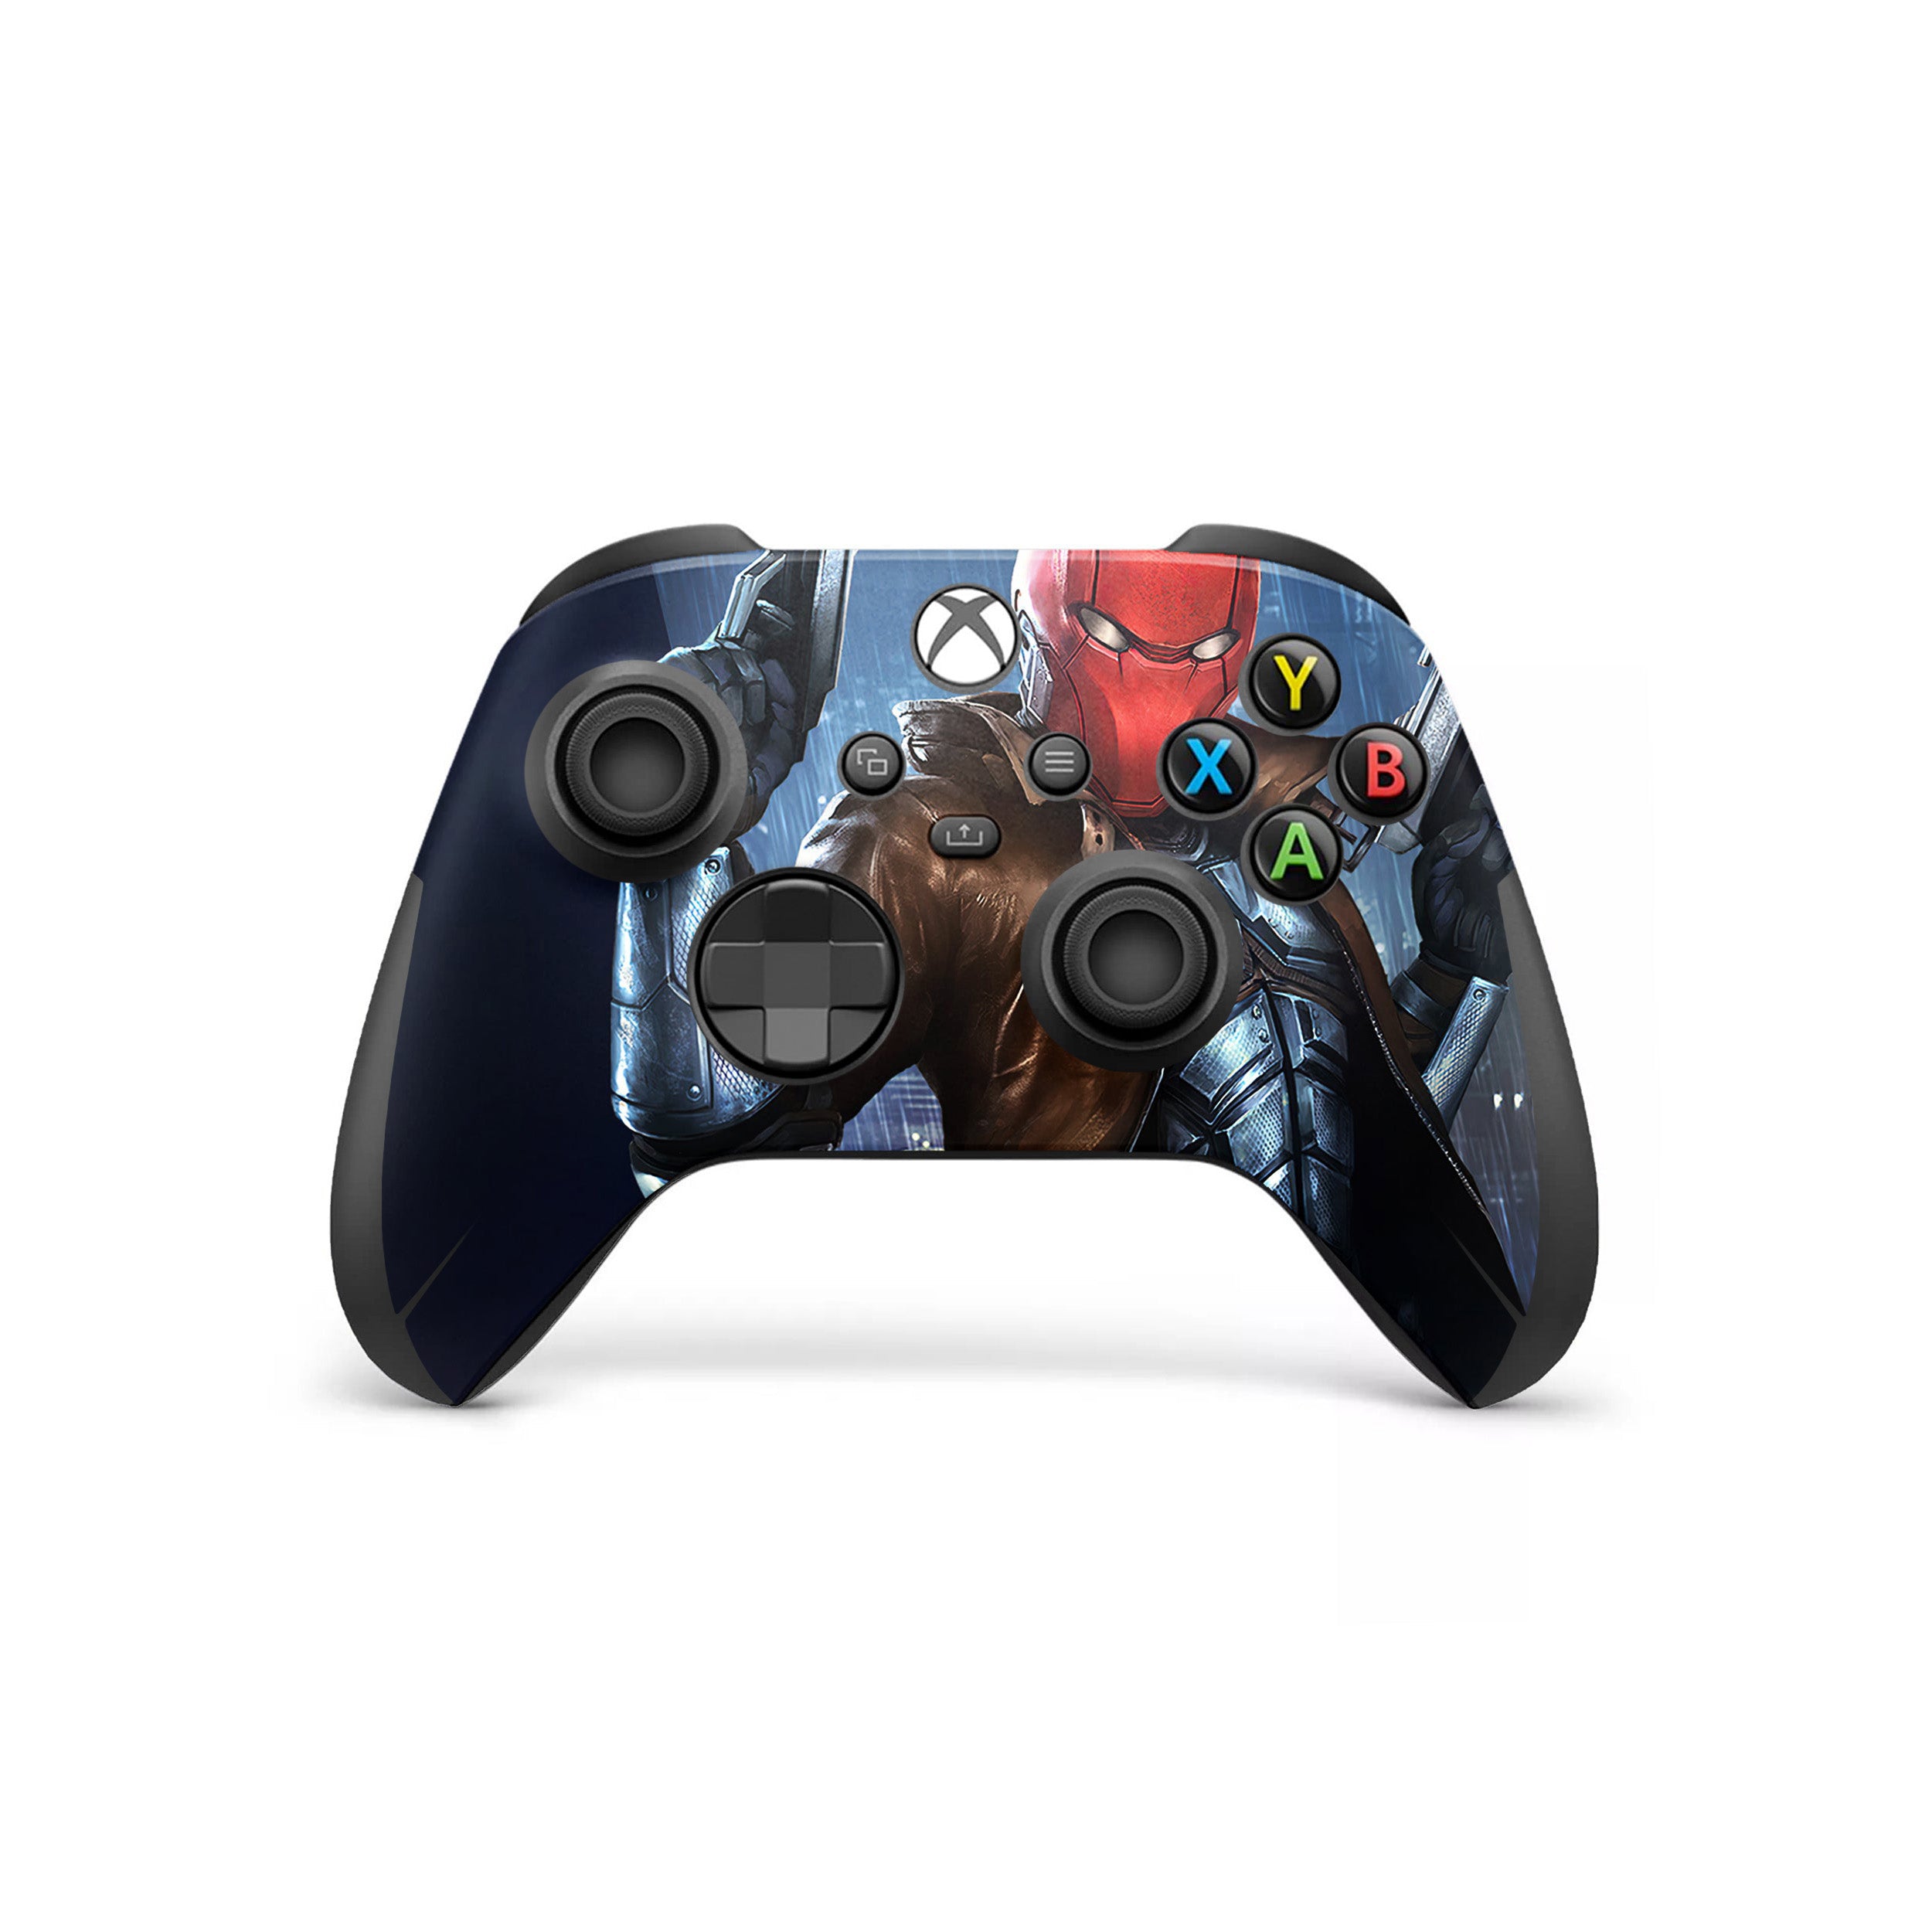 A video game skin featuring a DC Comics Red Hood design for the Xbox Wireless Controller.